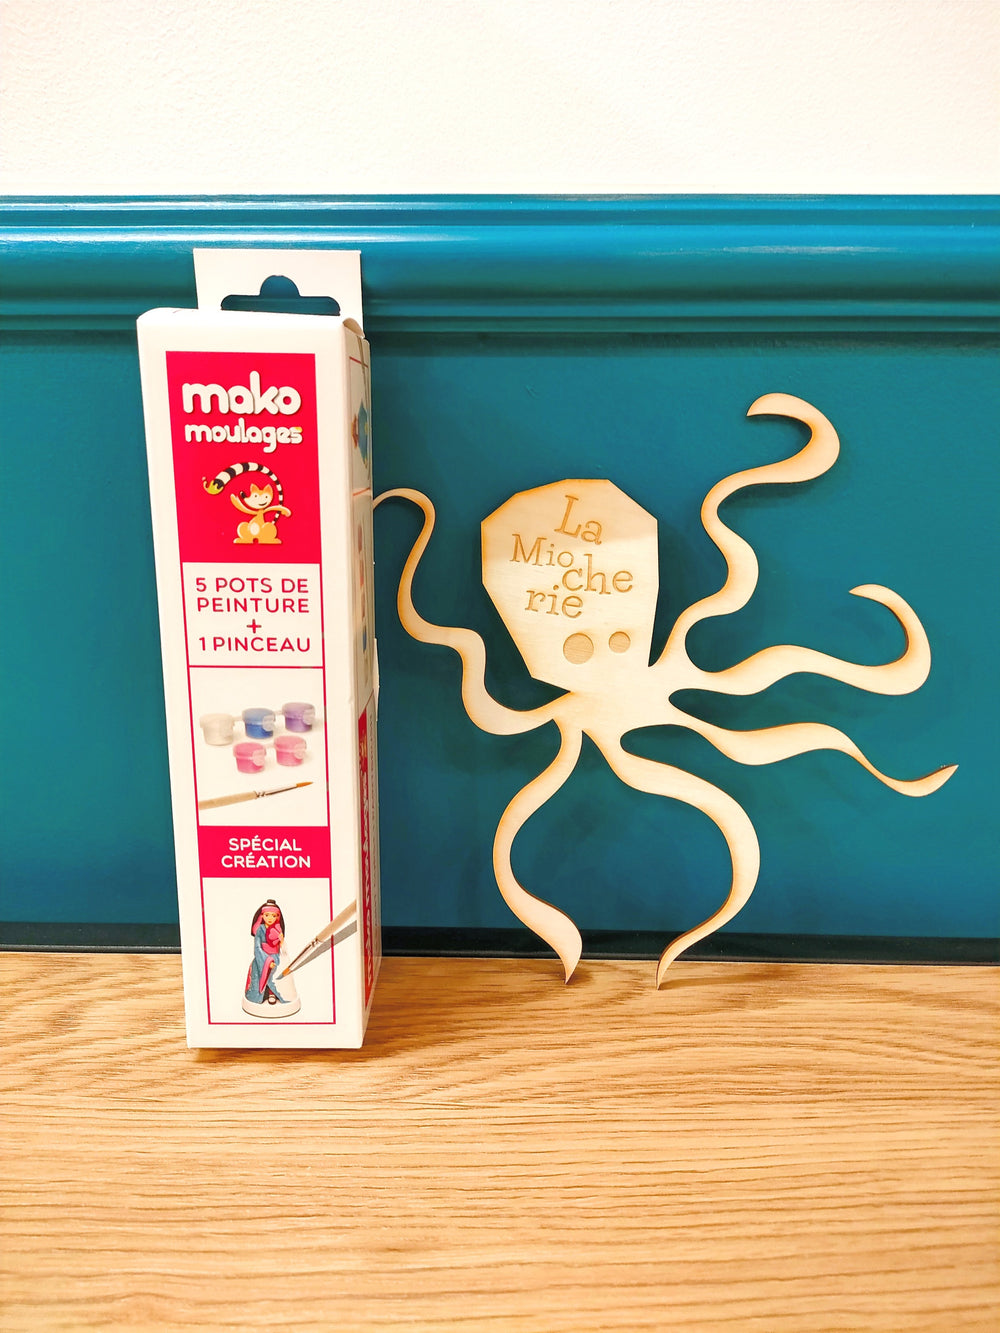 Recharge de peinture Girly - Made in France - Mako Moulages